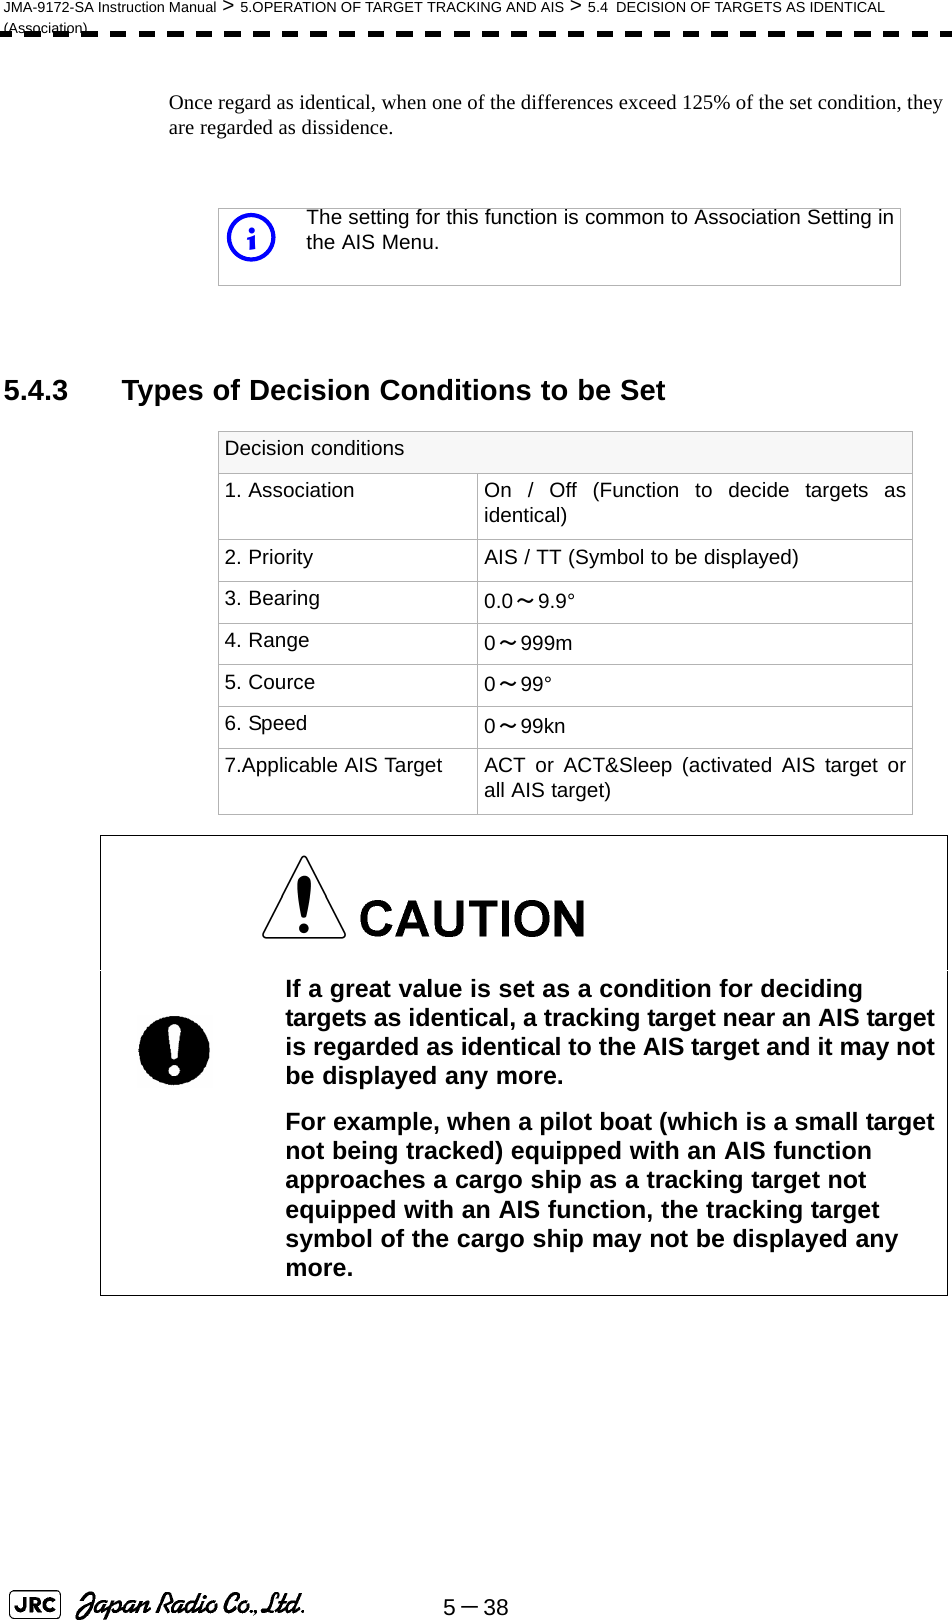 5－38JMA-9172-SA Instruction Manual &gt; 5.OPERATION OF TARGET TRACKING AND AIS &gt; 5.4  DECISION OF TARGETS AS IDENTICAL (Association)Once regard as identical, when one of the differences exceed 125% of the set condition, they are regarded as dissidence. 5.4.3 Types of Decision Conditions to be Set iThe setting for this function is common to Association Setting inthe AIS Menu.Decision conditions1. Association On / Off (Function to decide targets asidentical)2. Priority AIS / TT (Symbol to be displayed)3. Bearing 0.0～9.9° 4. Range 0～999m5. Cource 0～99° 6. Speed 0～99kn7.Applicable AIS Target ACT  or ACT&amp;Sleep (activated AIS target orall AIS target)If a great value is set as a condition for deciding targets as identical, a tracking target near an AIS target is regarded as identical to the AIS target and it may not be displayed any more.For example, when a pilot boat (which is a small target not being tracked) equipped with an AIS function approaches a cargo ship as a tracking target not equipped with an AIS function, the tracking target symbol of the cargo ship may not be displayed any more.